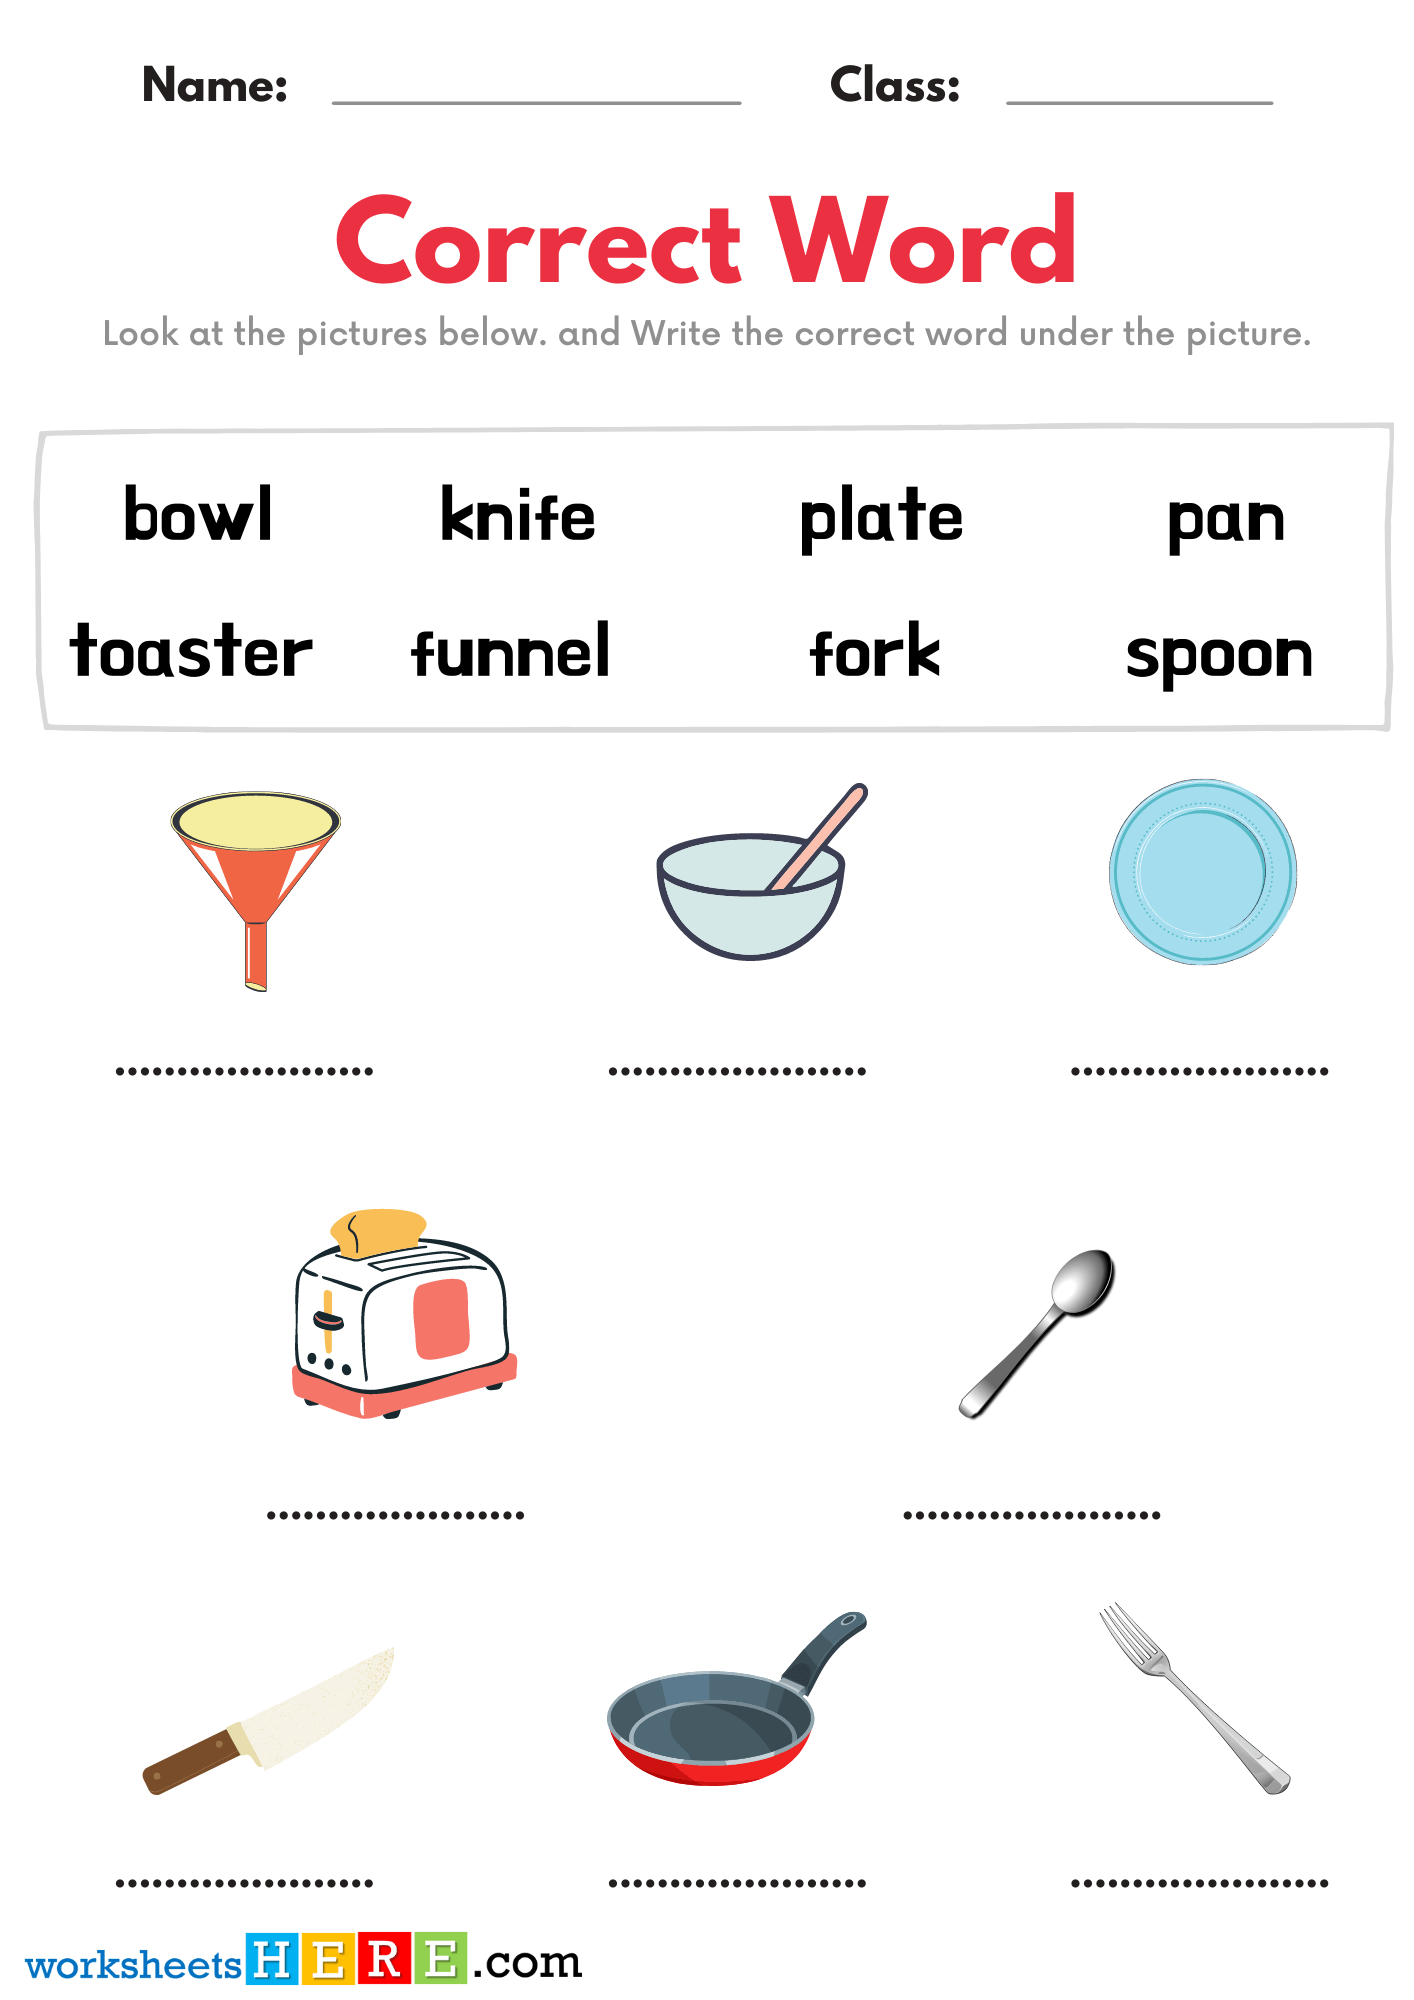 Matching Correct Words With Kitchen Tools Pictures PDF Worksheets For Students